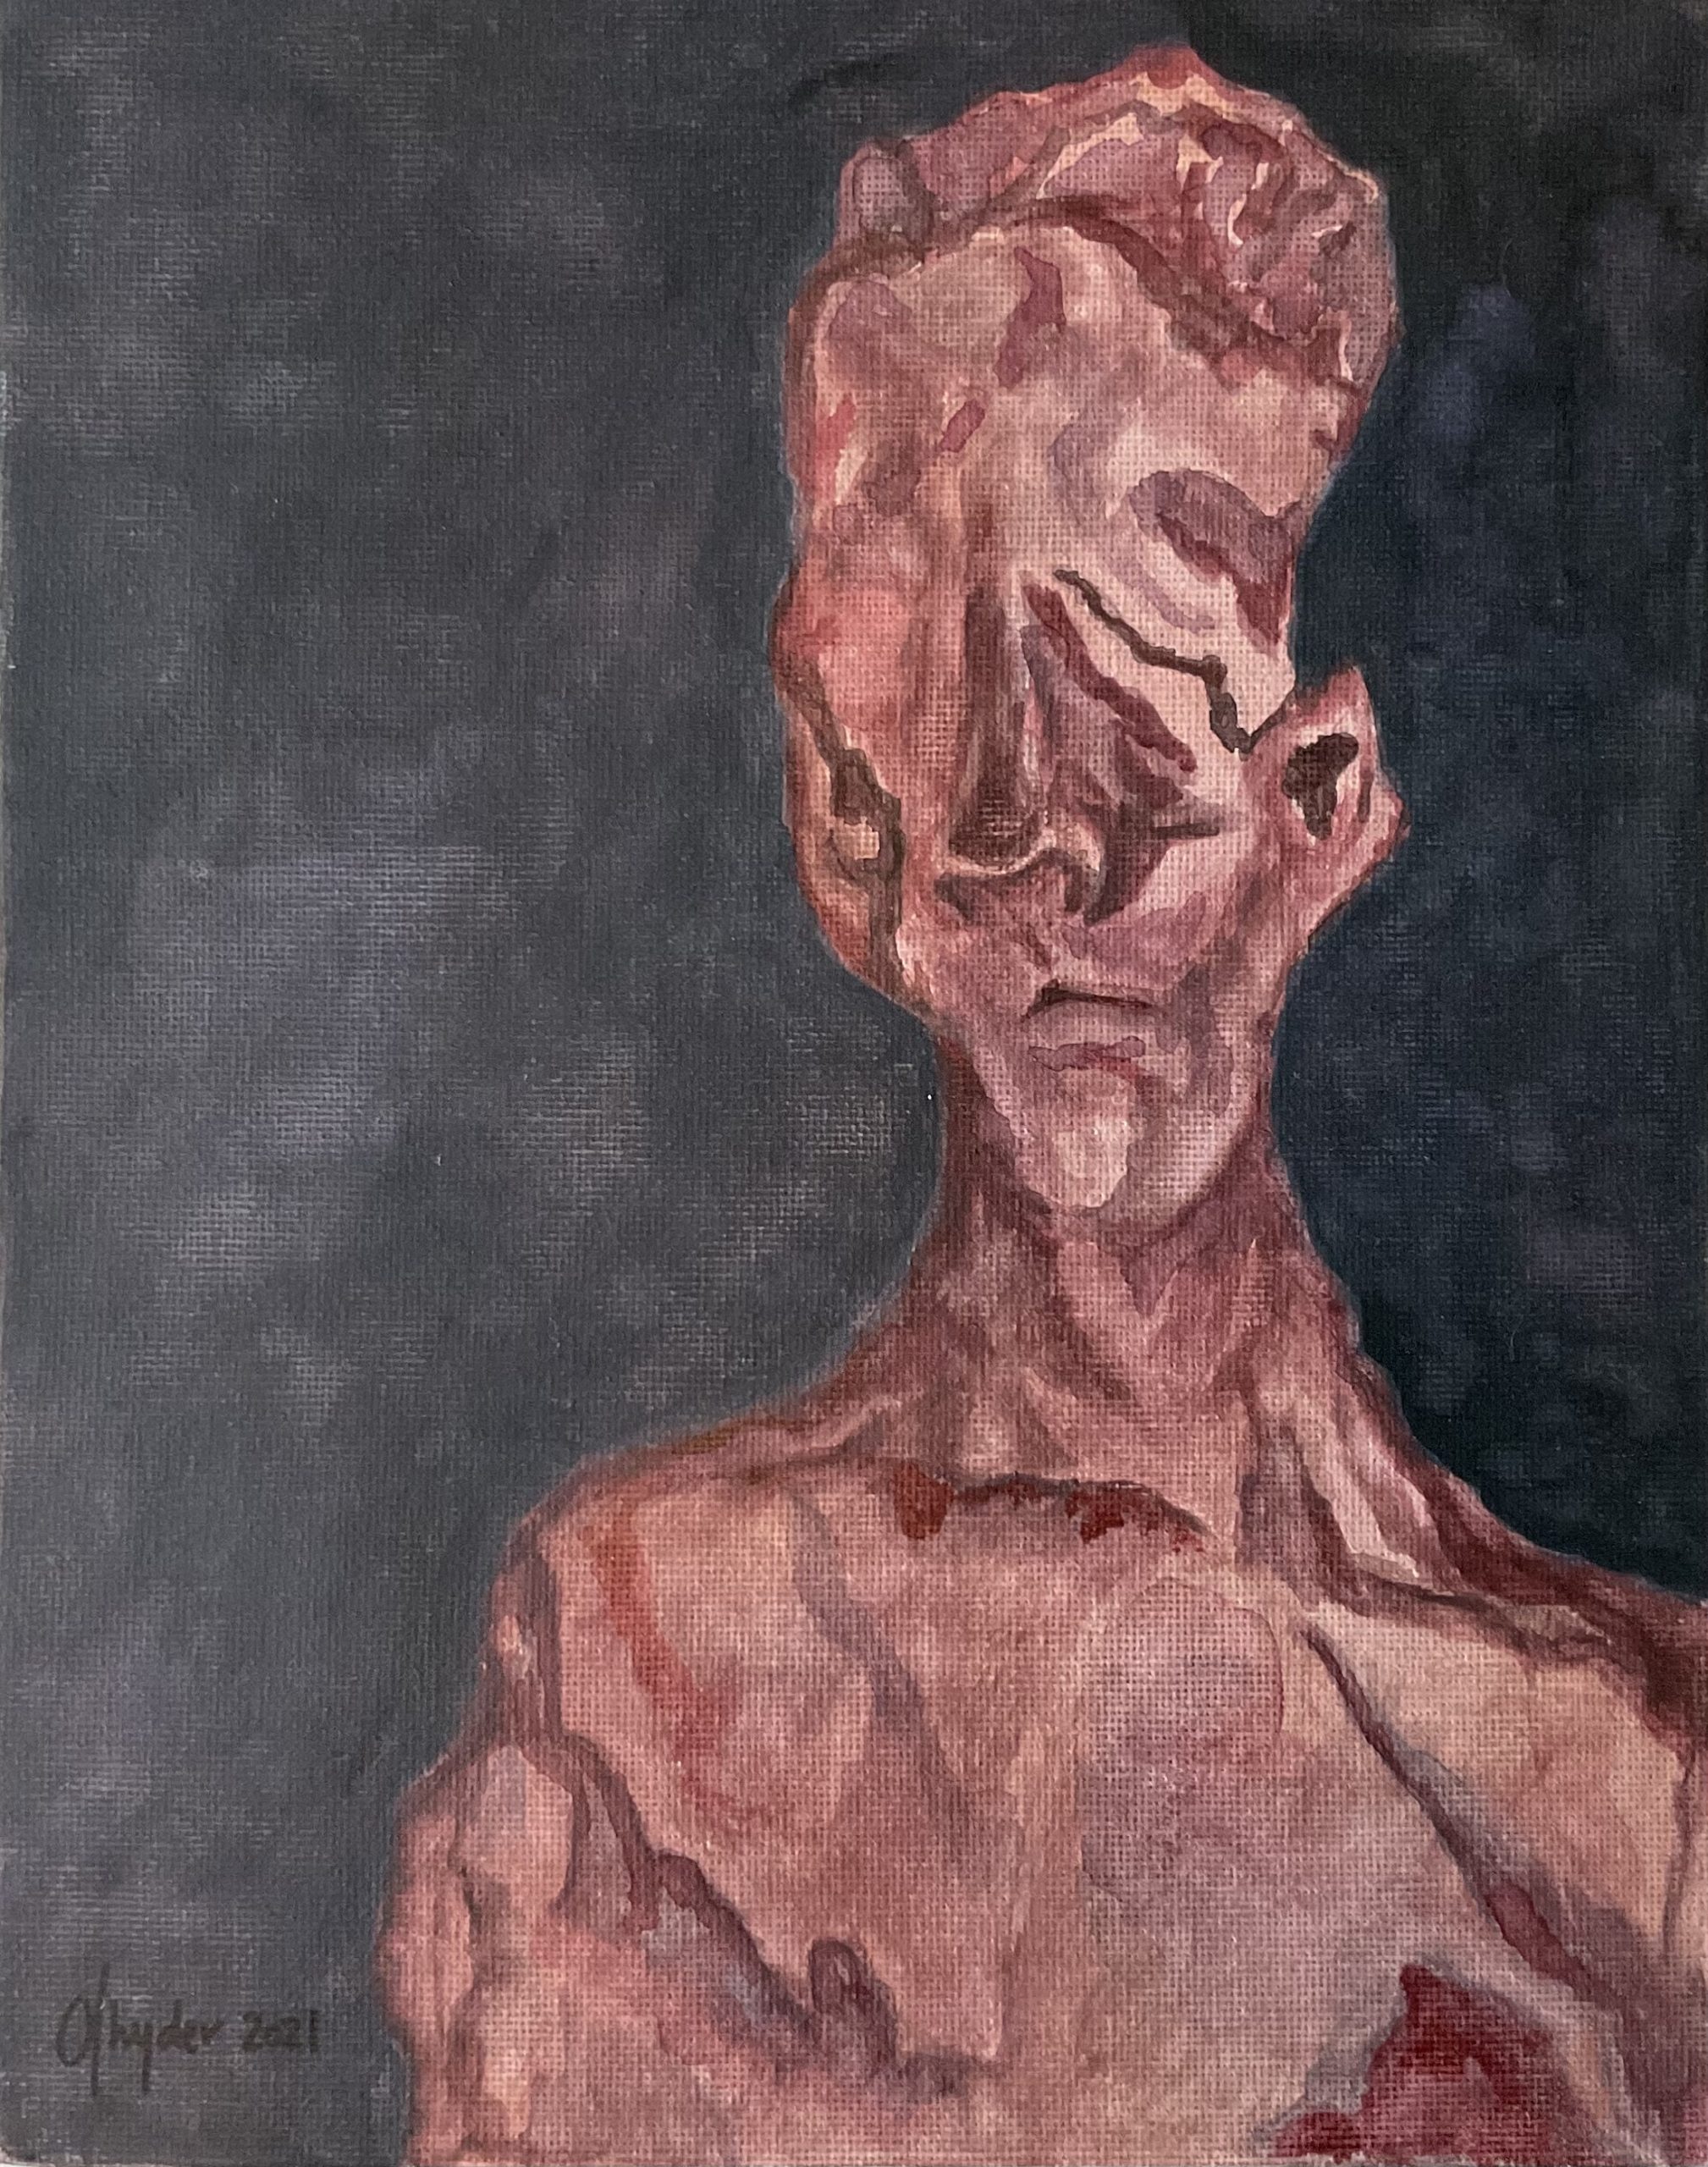 expressionist watercolour figure with dark navy/black background